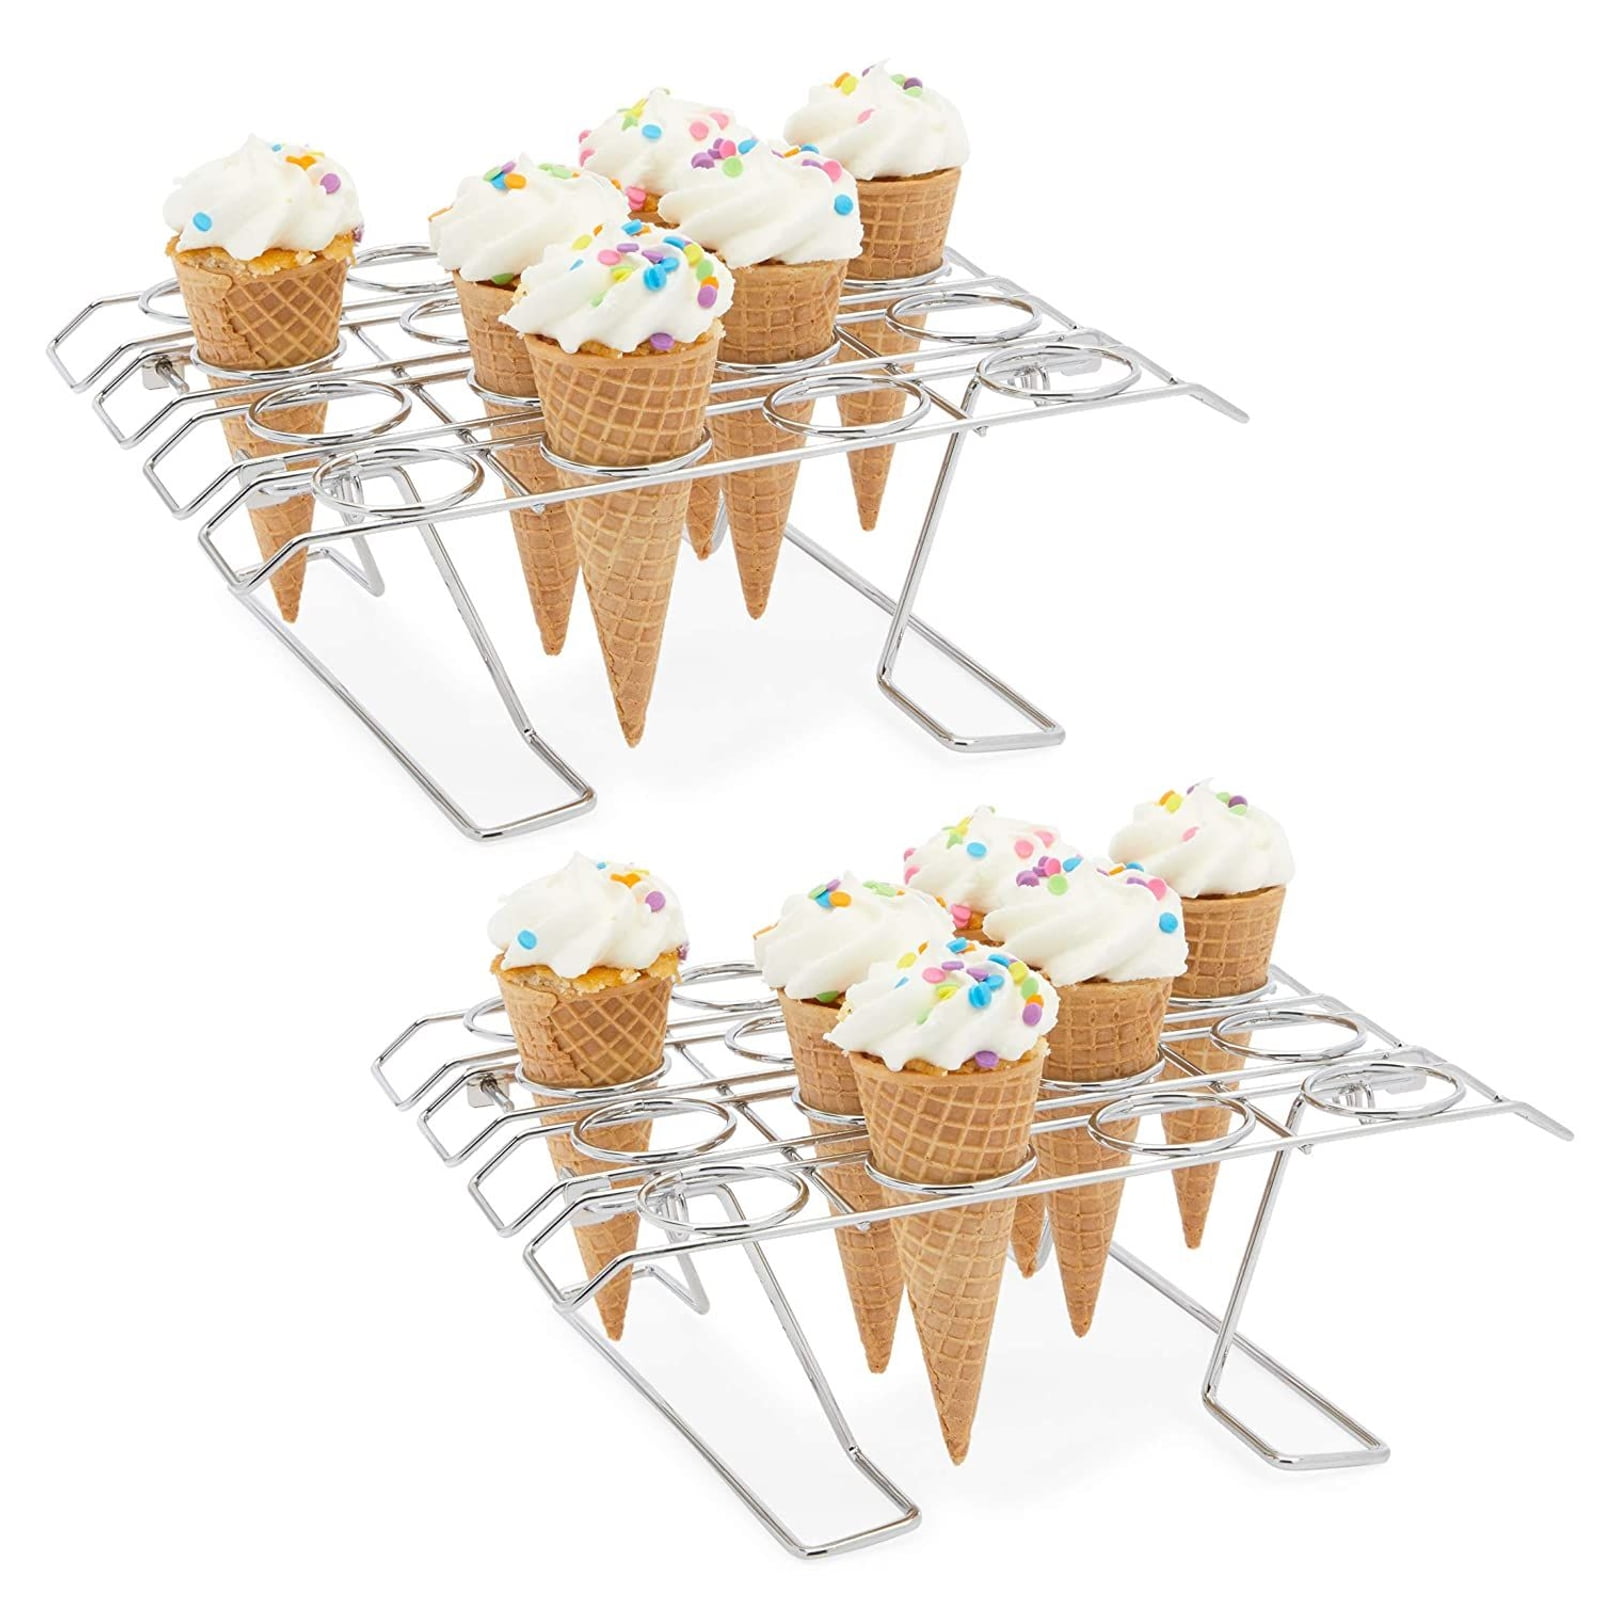 Engraved Acrylic Single Ice Cream Cone Holder Tray Display Stand Rack Wedding for sale online 